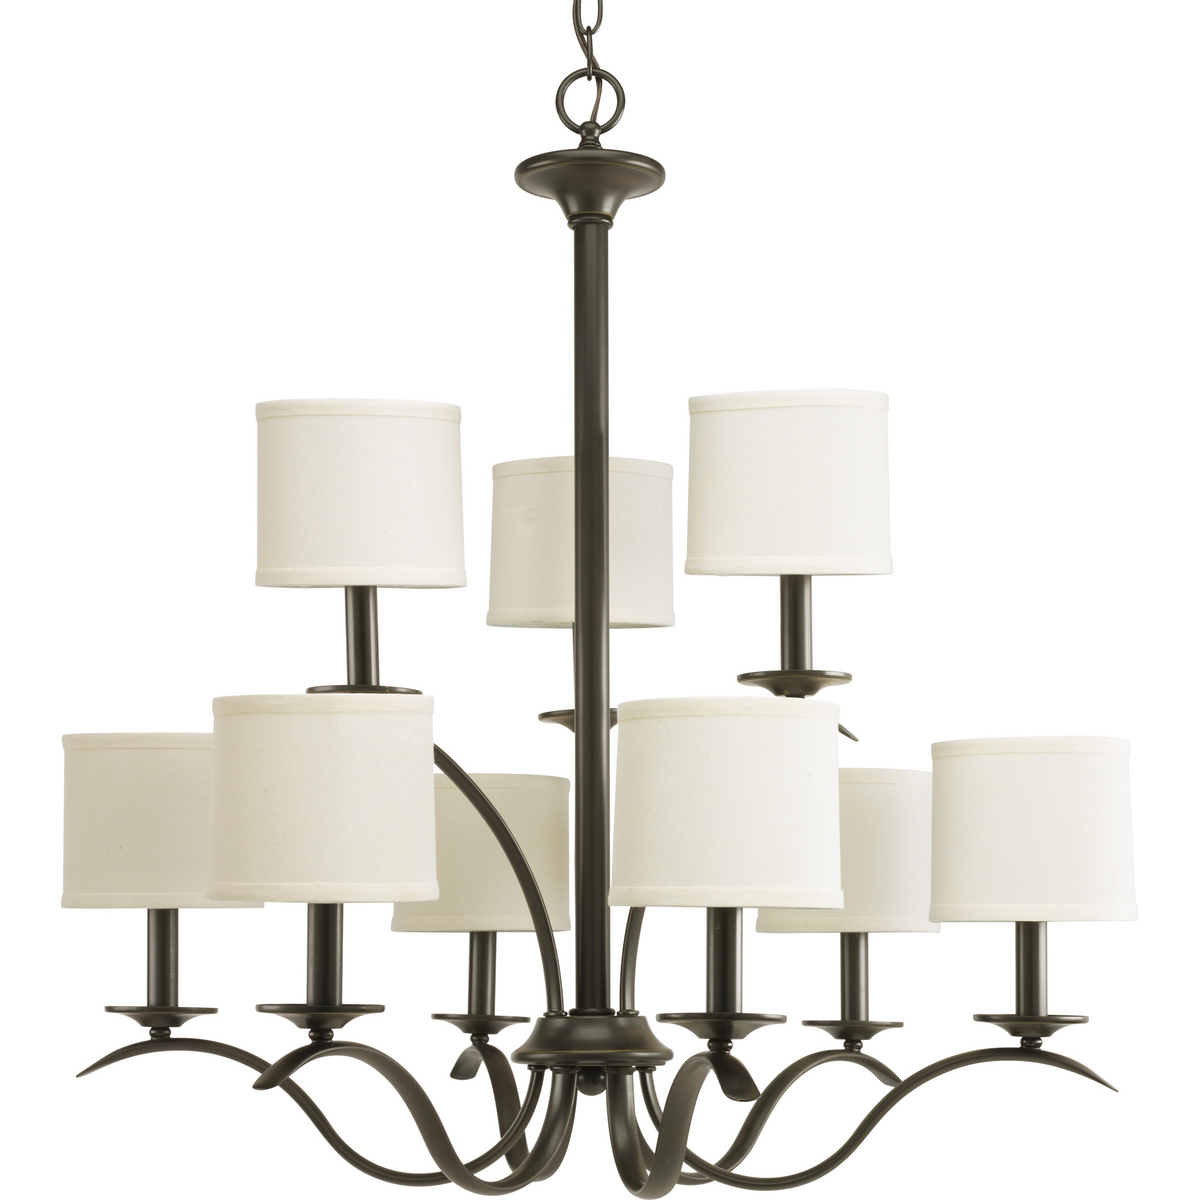 Harkening back to a simpler time, the Inspire Collection freshens traditional forms with flowing lines. Waving metal arms rush from the center to gracefully support off-white linen shades in this nine-light, two-tier chandelier in Antique Bronze. Unique ceiling chain mount supplies you with 6 feet of 9 gauge chain.